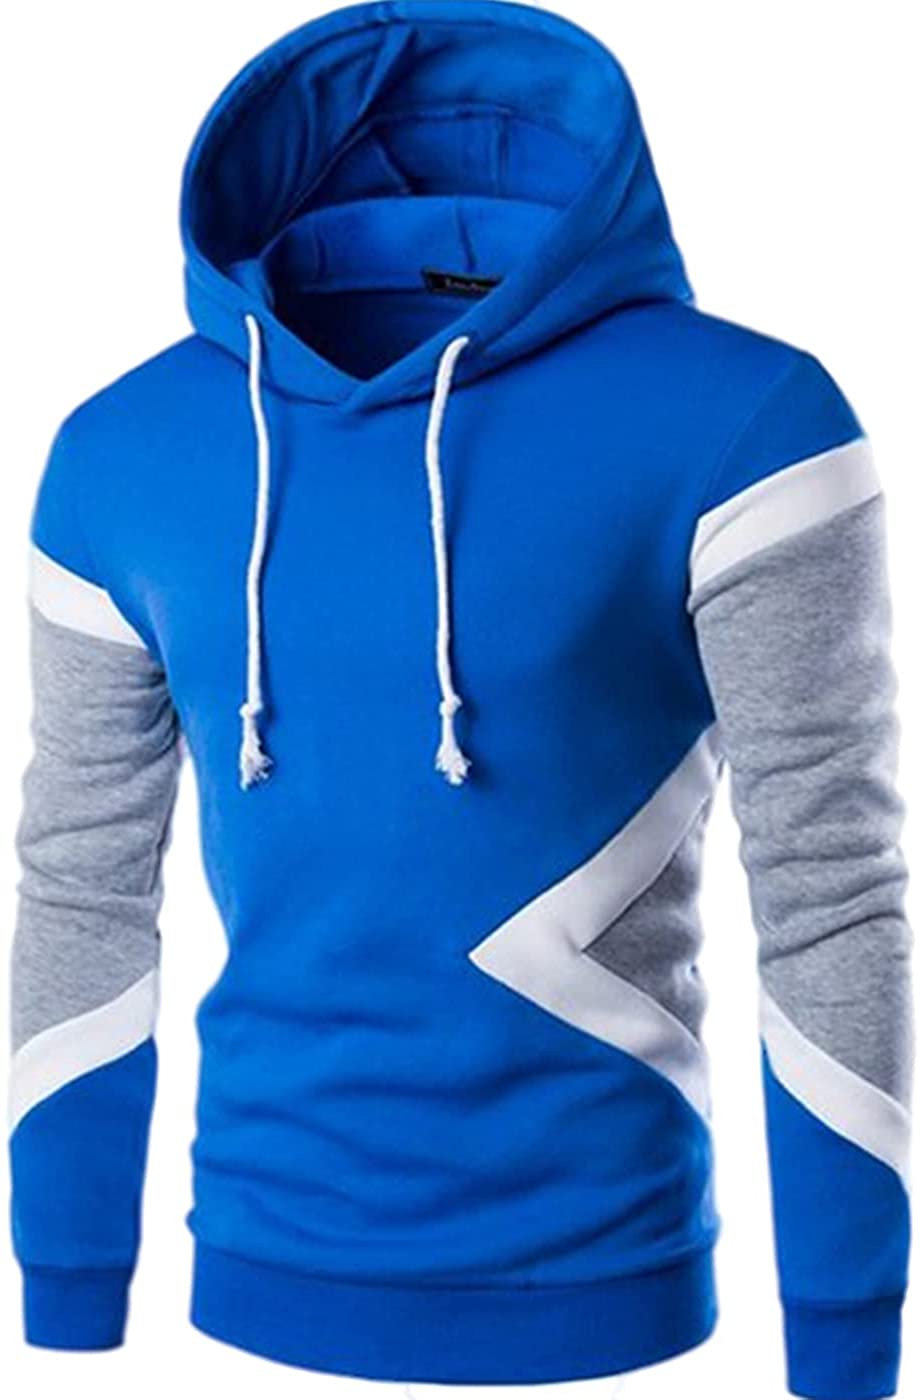 LQHHYLYX Men's Multicolor Stitching Hooded Long Sleeve Comfortable Sweatshirt 